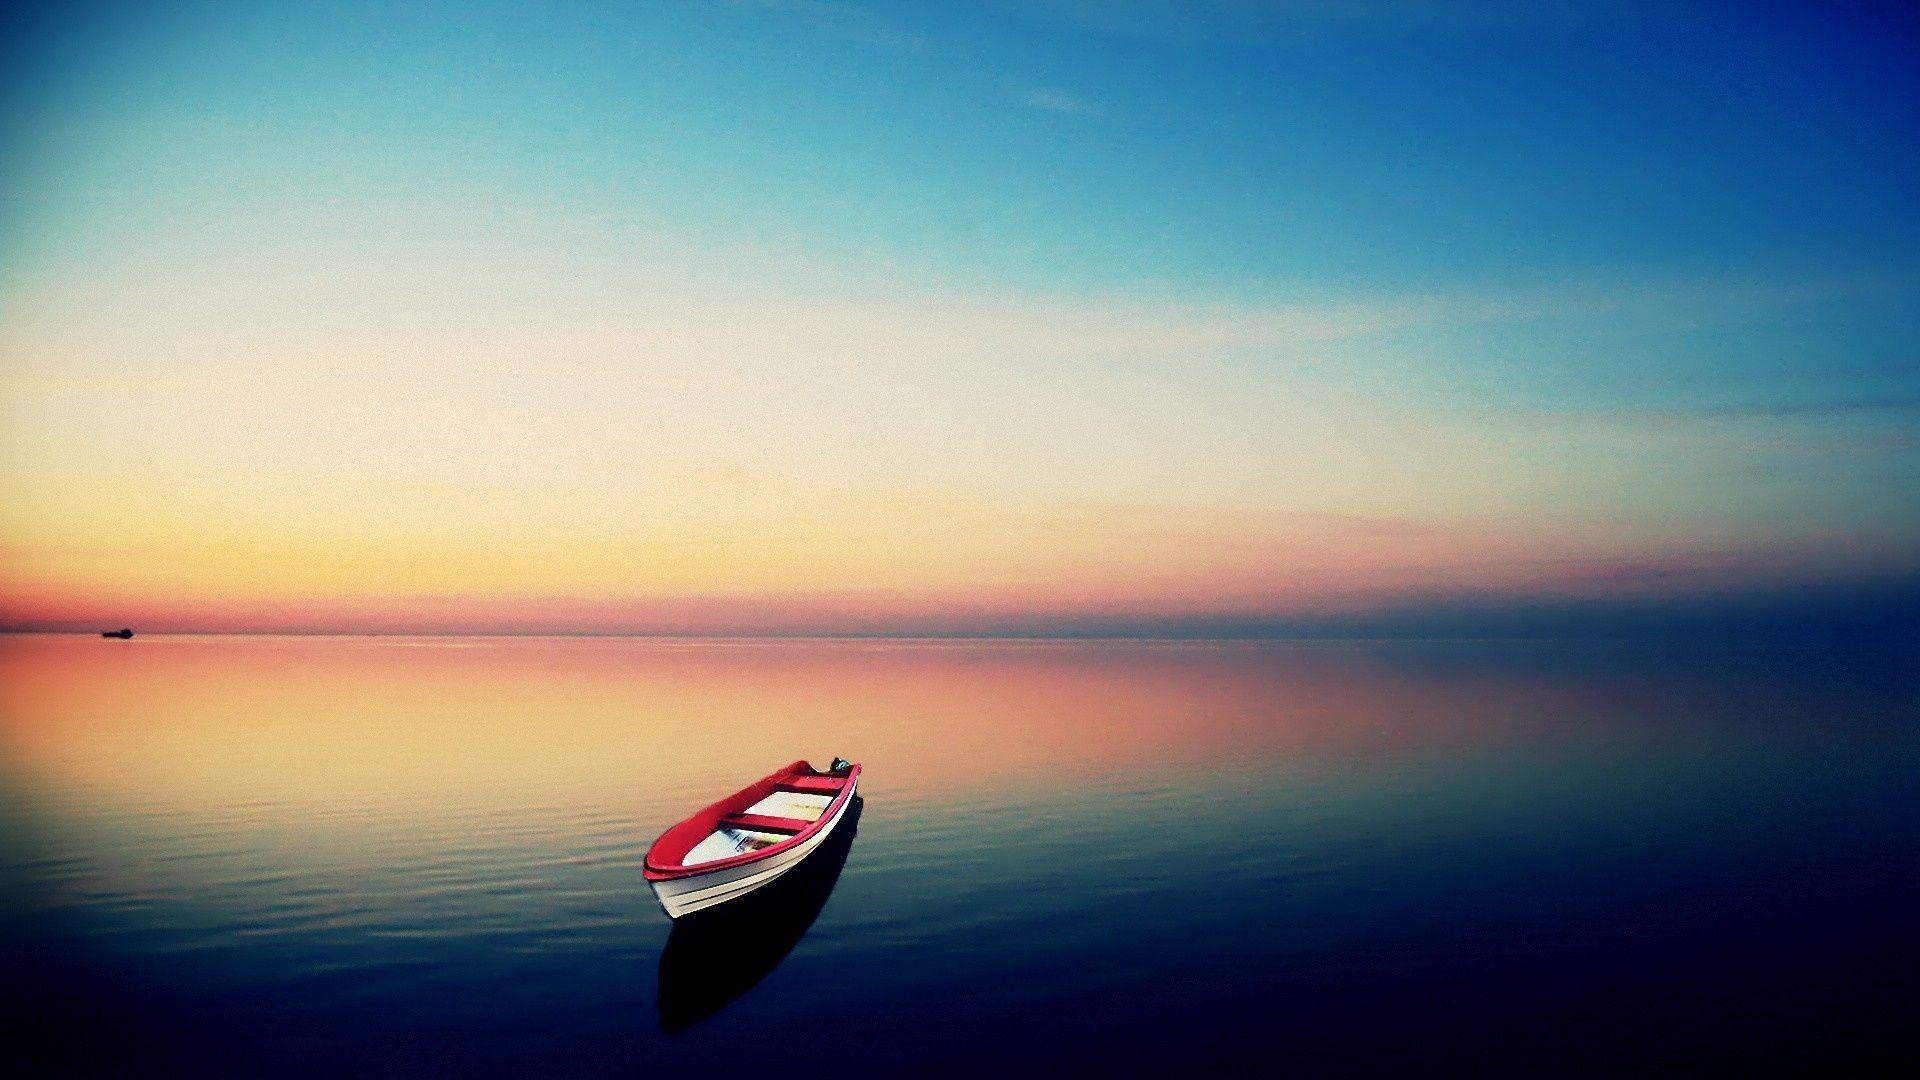 Download Wallpaper 1920x1080 boat, sea, water surface, loneliness